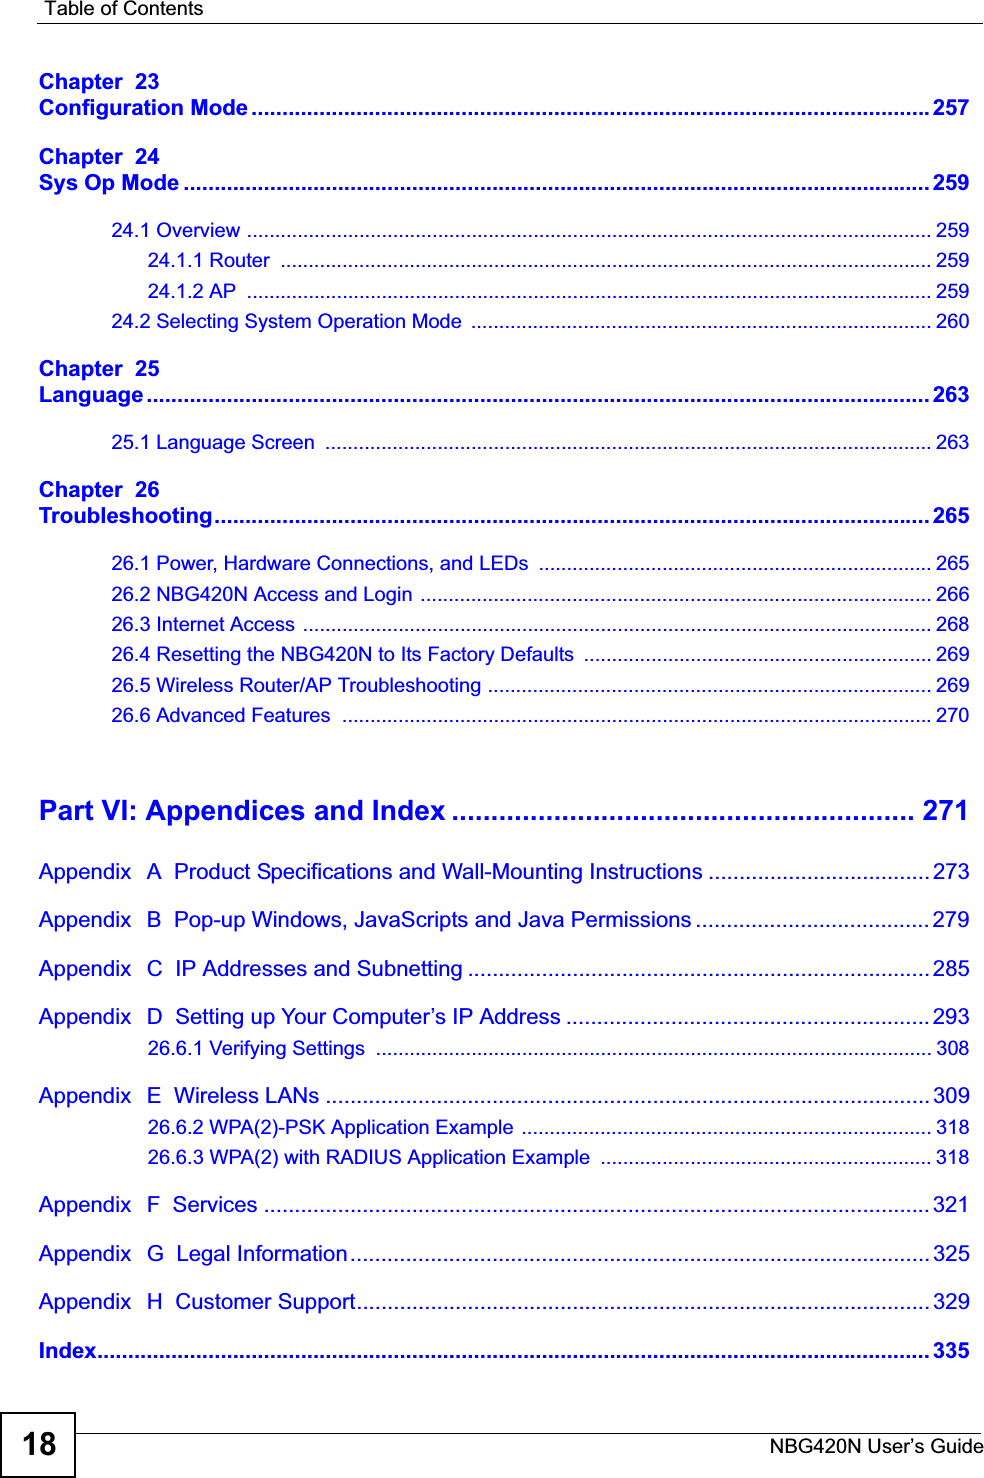 Table of ContentsNBG420N User’s Guide18Chapter  23Configuration Mode..............................................................................................................257Chapter  24Sys Op Mode ......................................................................................................................... 25924.1 Overview .......................................................................................................................... 25924.1.1 Router  .................................................................................................................... 25924.1.2 AP  .......................................................................................................................... 25924.2 Selecting System Operation Mode  .................................................................................. 260Chapter  25Language ............................................................................................................................... 26325.1 Language Screen  ............................................................................................................ 263Chapter  26Troubleshooting.................................................................................................................... 26526.1 Power, Hardware Connections, and LEDs  ...................................................................... 26526.2 NBG420N Access and Login  ........................................................................................... 26626.3 Internet Access ................................................................................................................ 26826.4 Resetting the NBG420N to Its Factory Defaults  .............................................................. 26926.5 Wireless Router/AP Troubleshooting ............................................................................... 26926.6 Advanced Features  .........................................................................................................270Part VI: Appendices and Index ........................................................... 271Appendix   A  Product Specifications and Wall-Mounting Instructions ....................................273Appendix   B  Pop-up Windows, JavaScripts and Java Permissions ...................................... 279Appendix   C  IP Addresses and Subnetting ........................................................................... 285Appendix   D  Setting up Your Computer’s IP Address ........................................................... 29326.6.1 Verifying Settings  ................................................................................................... 308Appendix   E  Wireless LANs ..................................................................................................30926.6.2 WPA(2)-PSK Application Example ......................................................................... 31826.6.3 WPA(2) with RADIUS Application Example  ........................................................... 318Appendix   F  Services ............................................................................................................ 321Appendix   G  Legal Information.............................................................................................. 325Appendix   H  Customer Support............................................................................................. 329Index....................................................................................................................................... 335